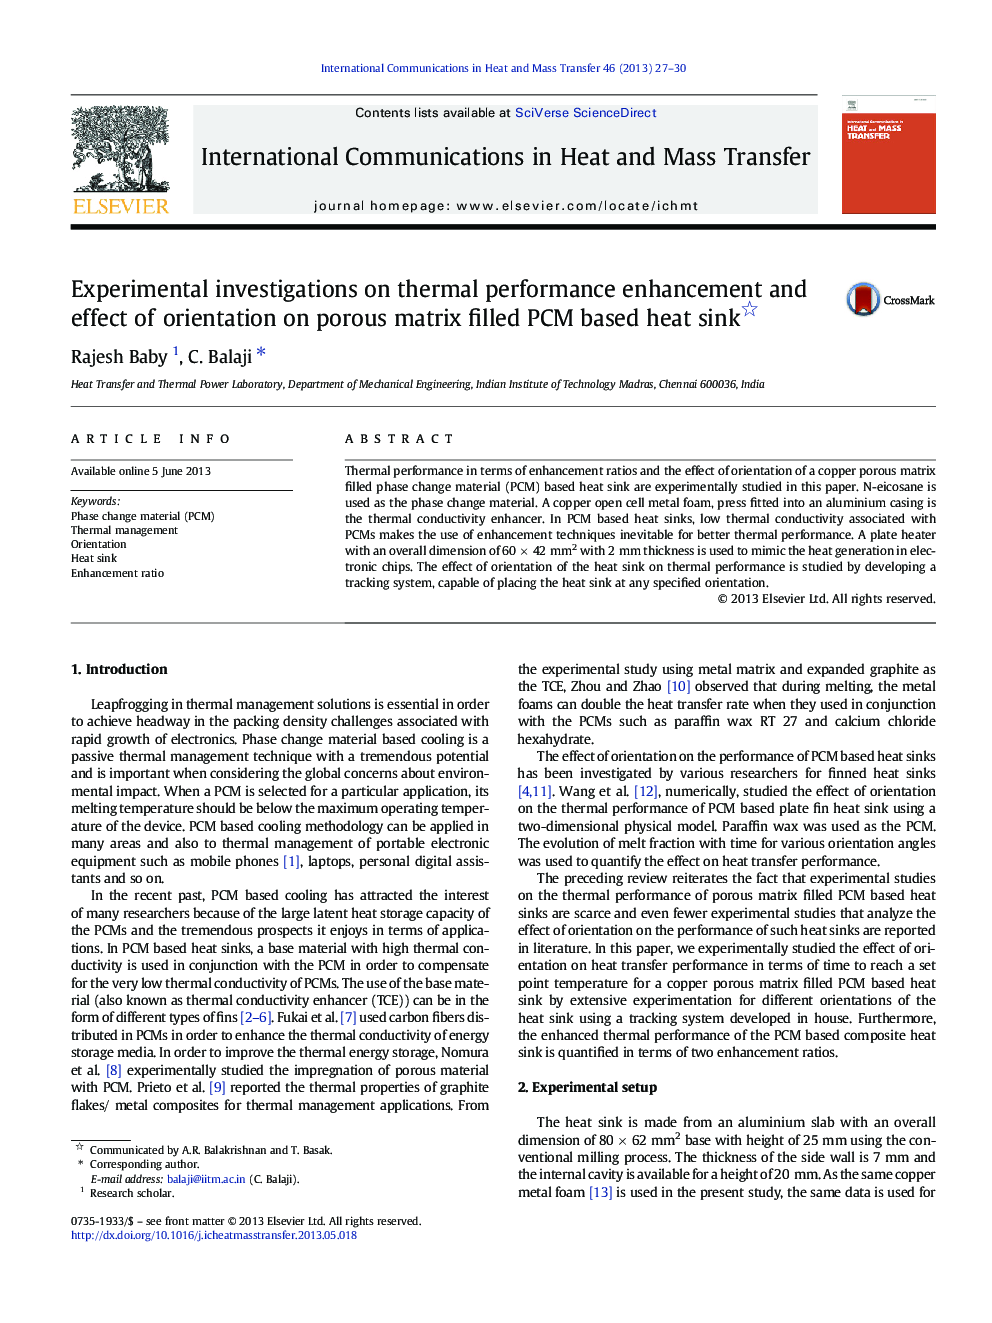 Experimental investigations on thermal performance enhancement and effect of orientation on porous matrix filled PCM based heat sink 